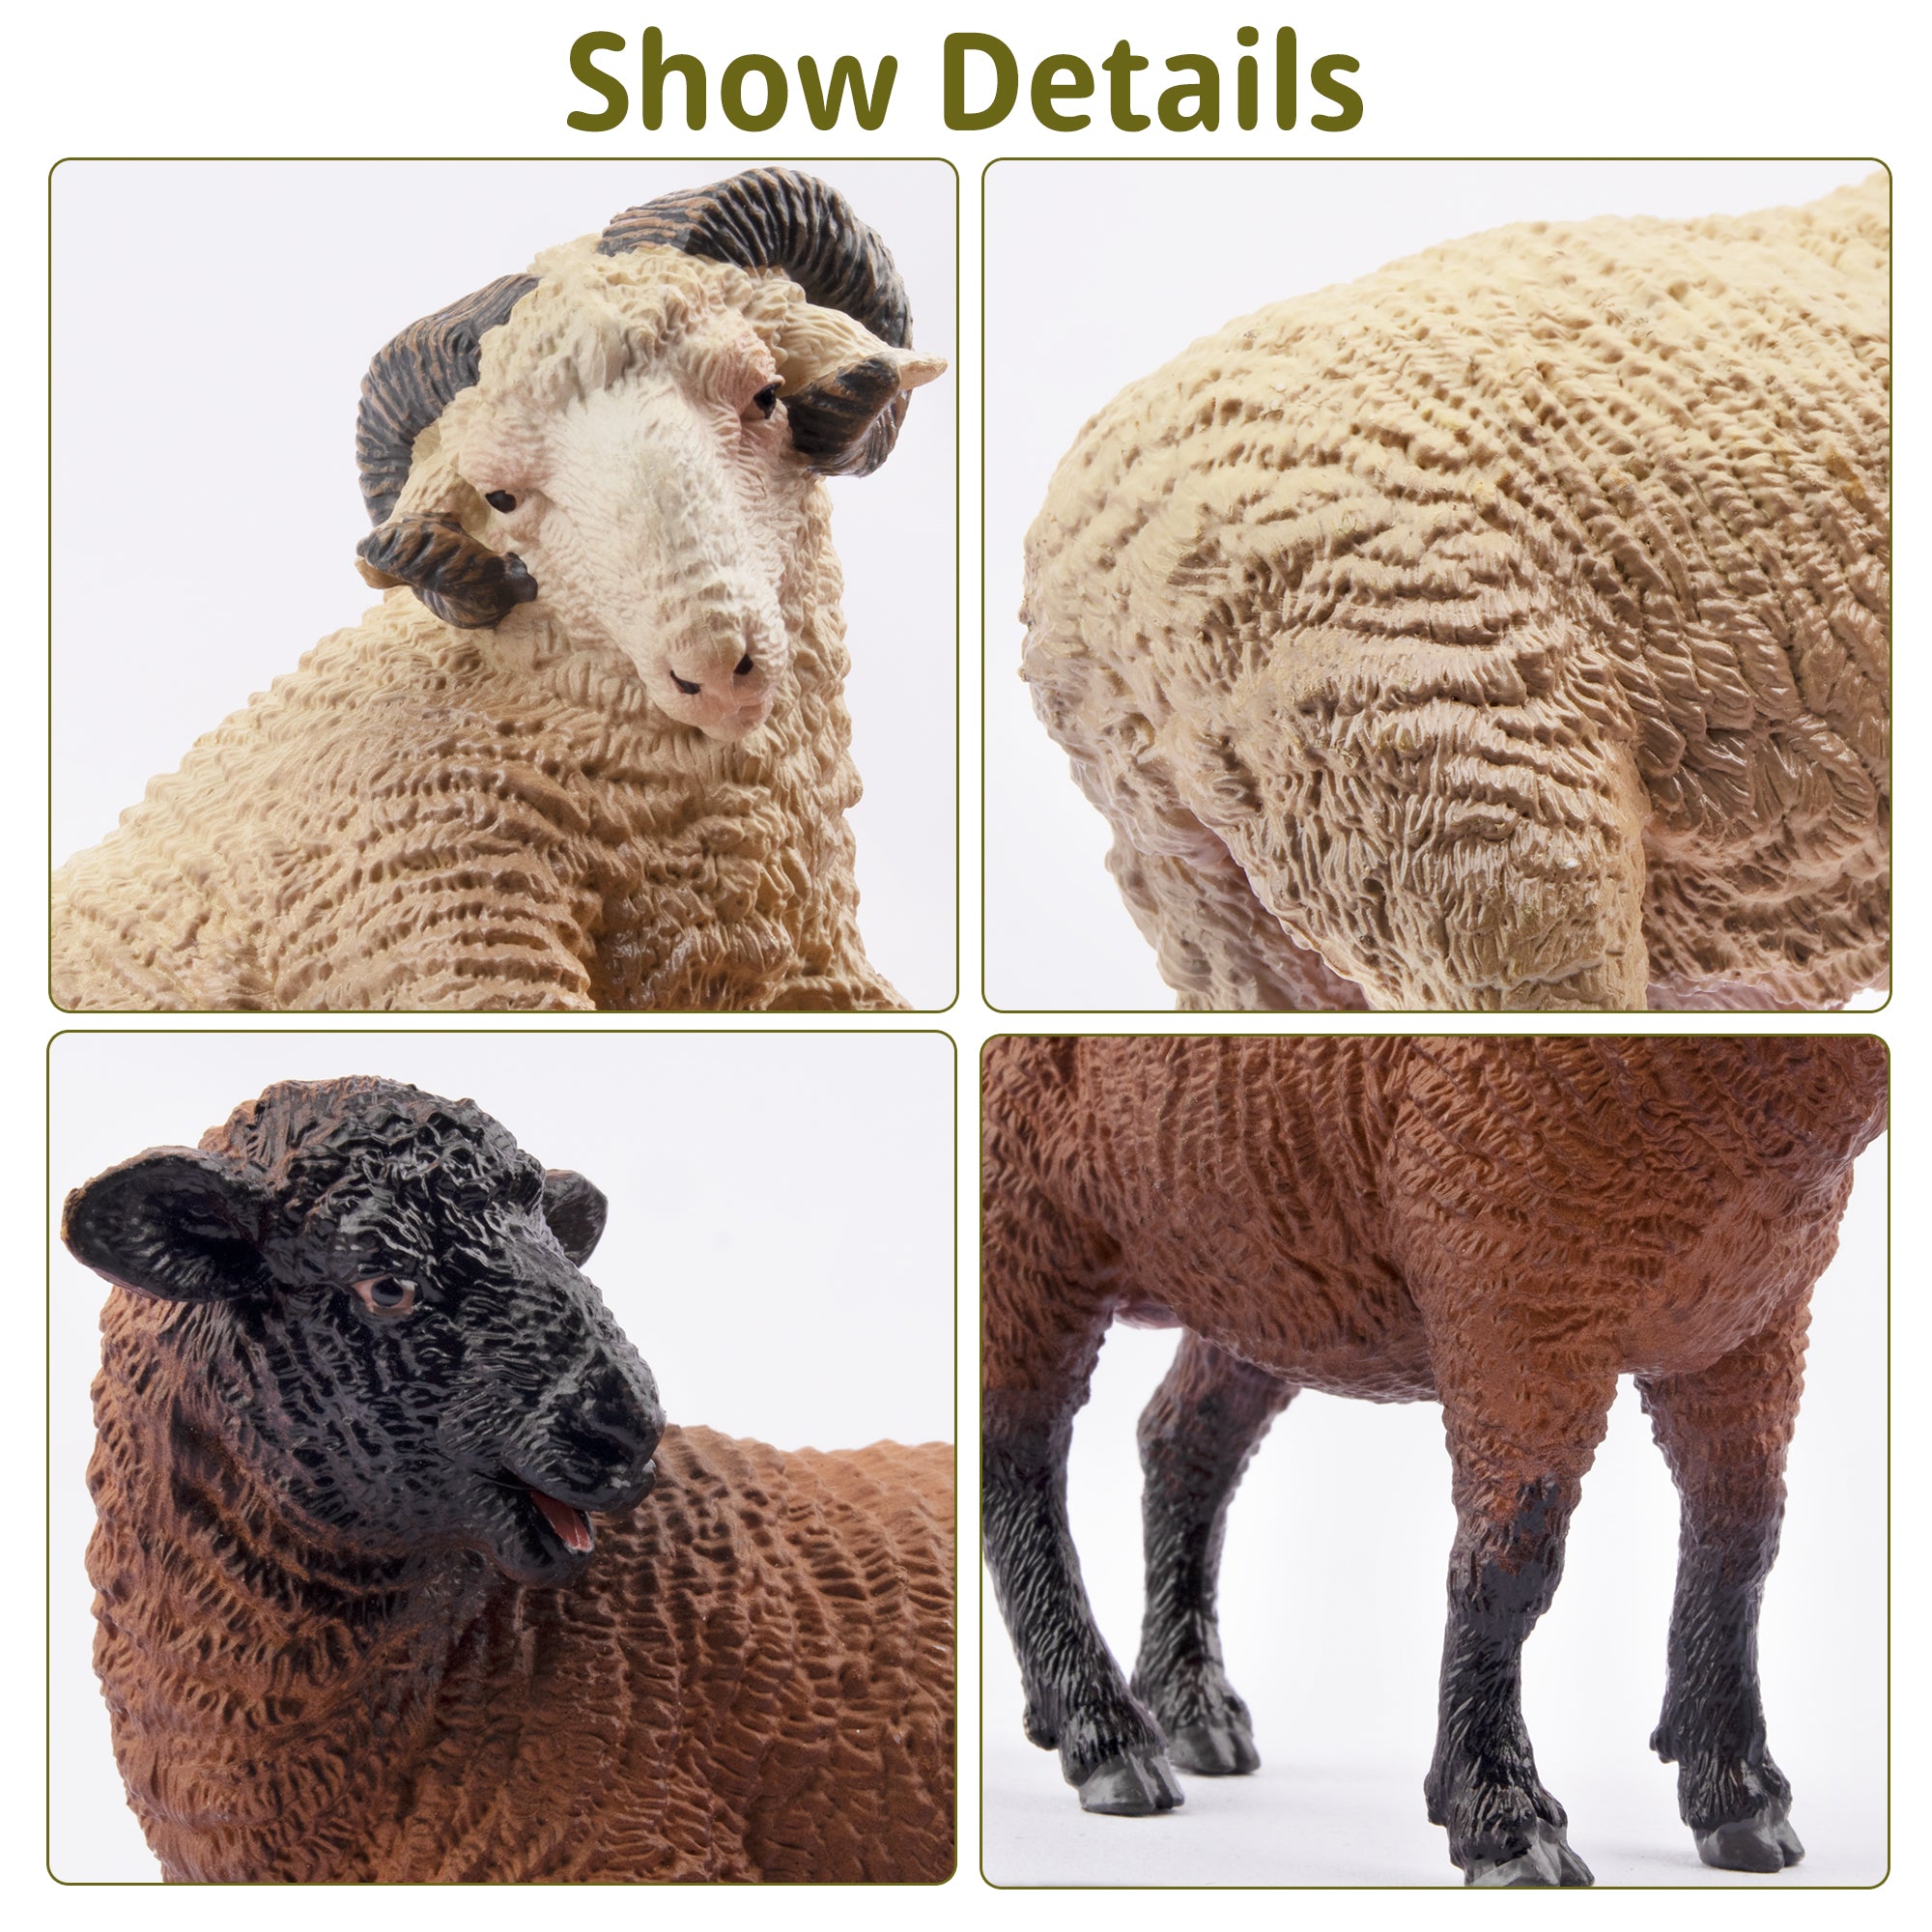 8-Piece Merino Sheep Figurines Playset with Adult & Baby Sheep-detail